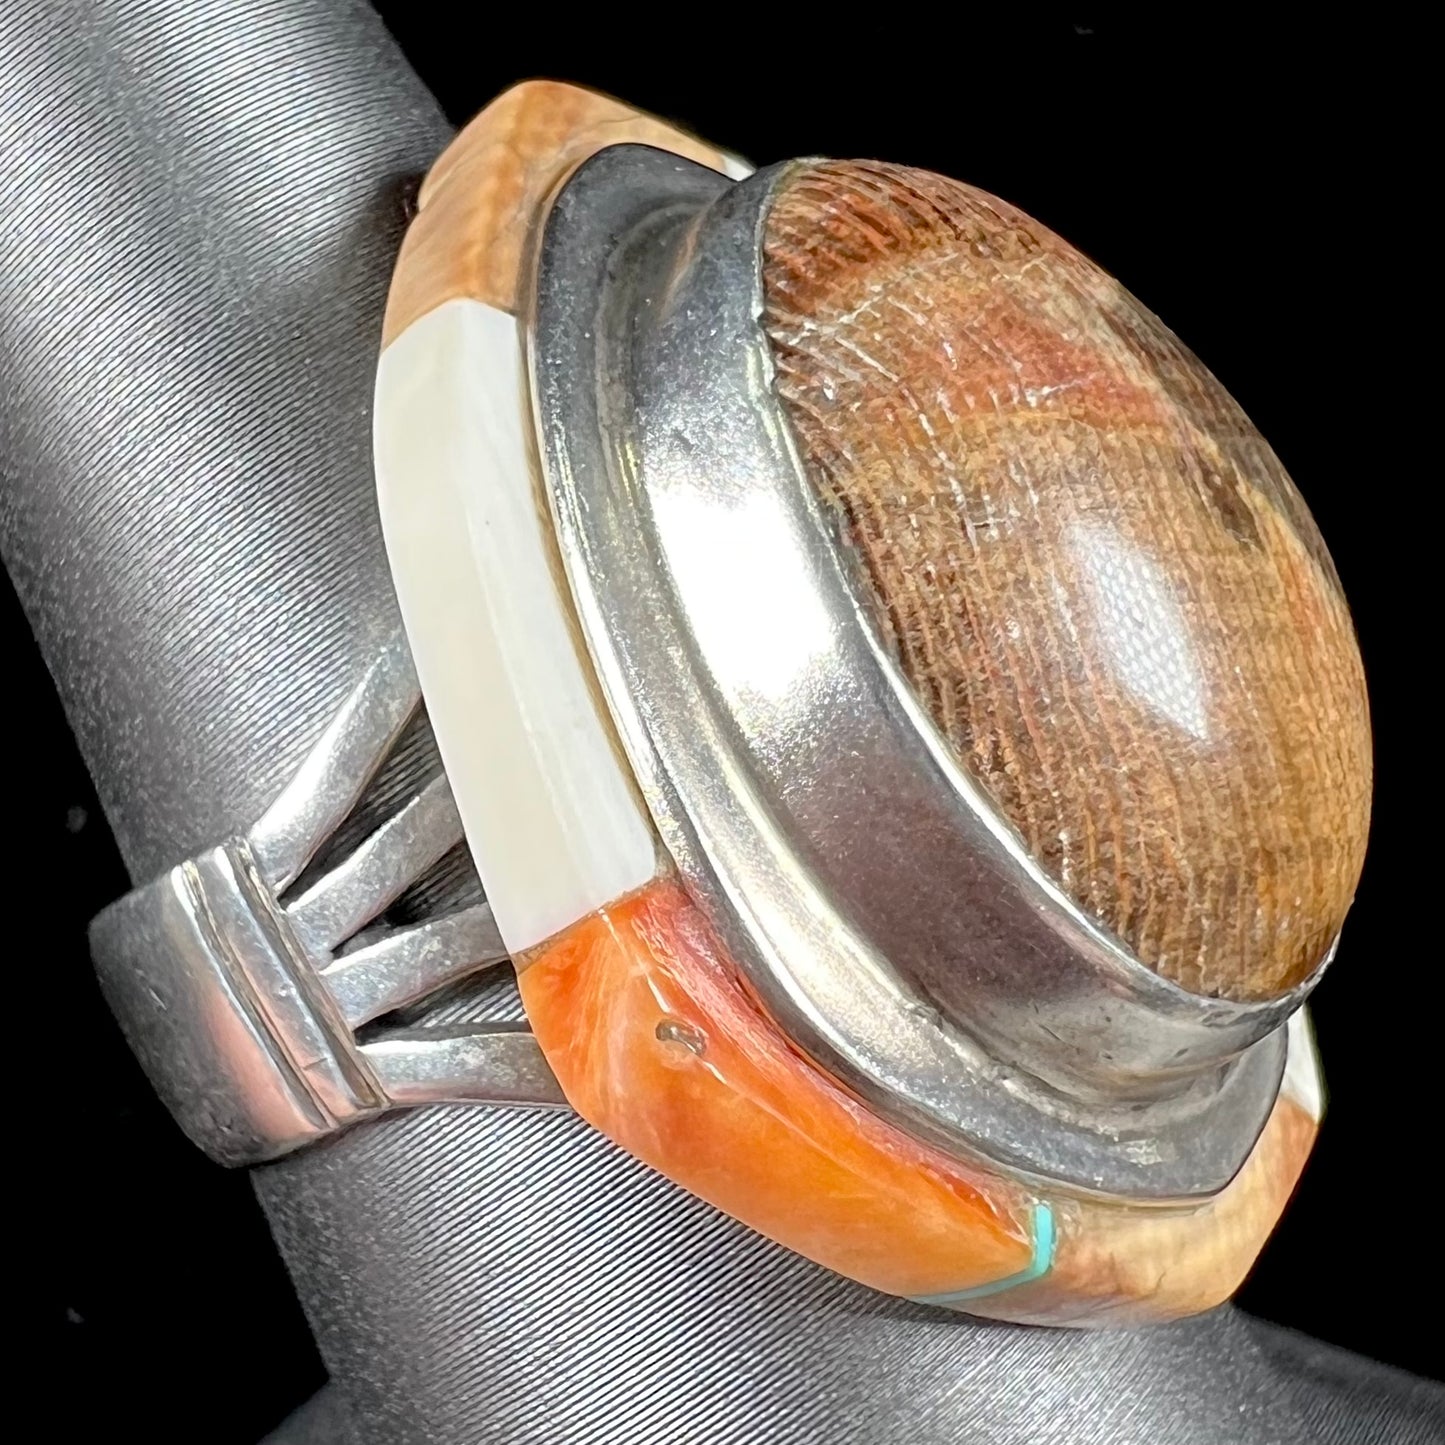 A silver ring handmade from a bezel set petrified wood stone, surrounded by quartz, carnelian, and bone inlay.